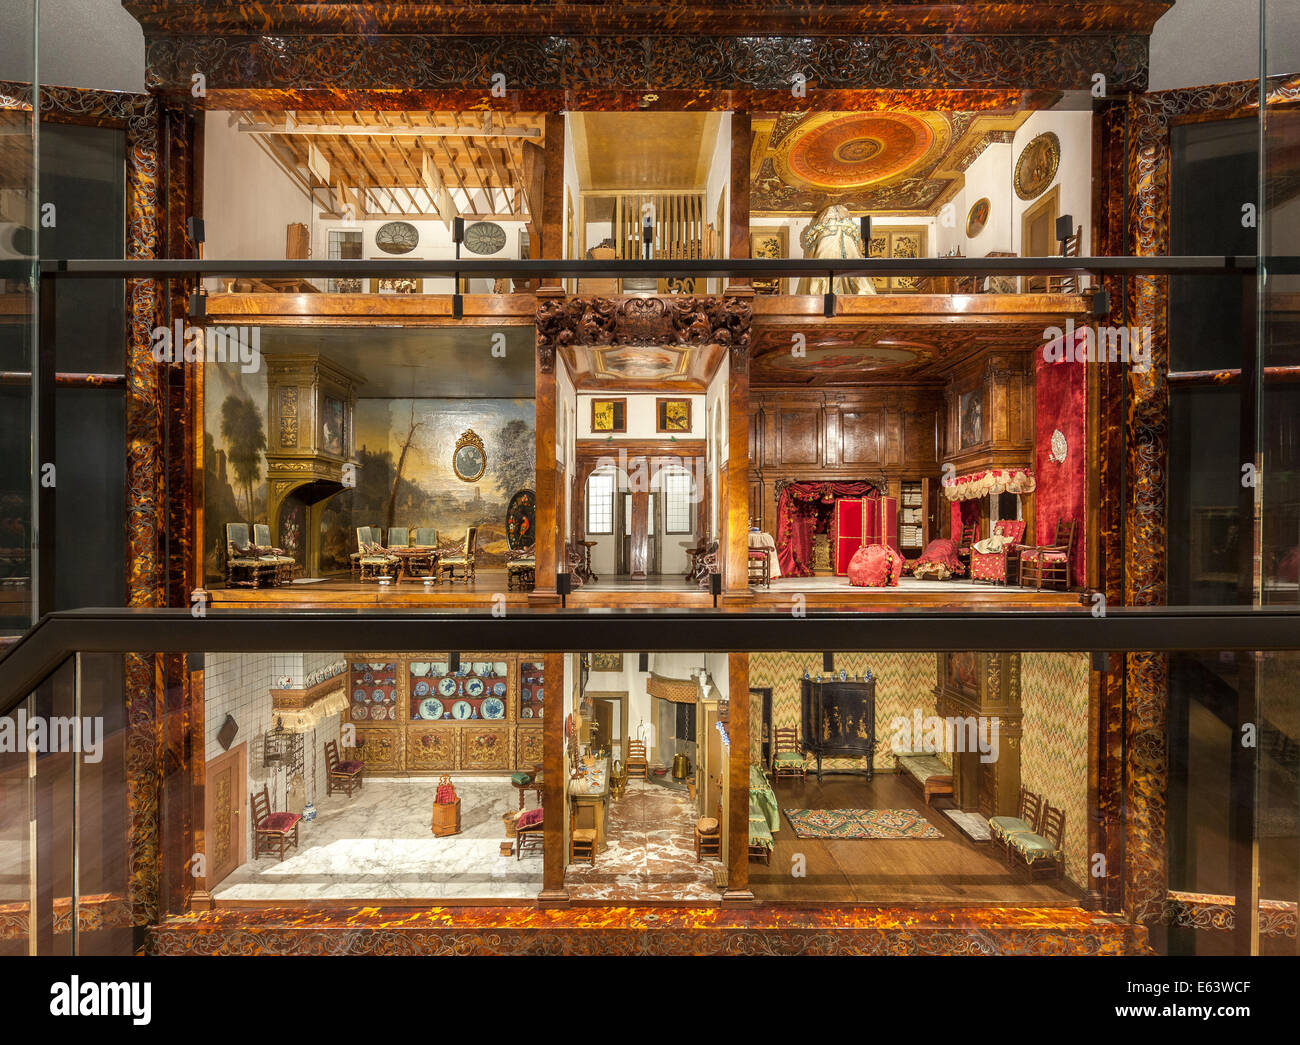 Amsterdam Rijksmuseum Dutch Cabinet Dolls’ house of Petronella Oortman. A perennial favorite with visitors of all ages. Stock Photo